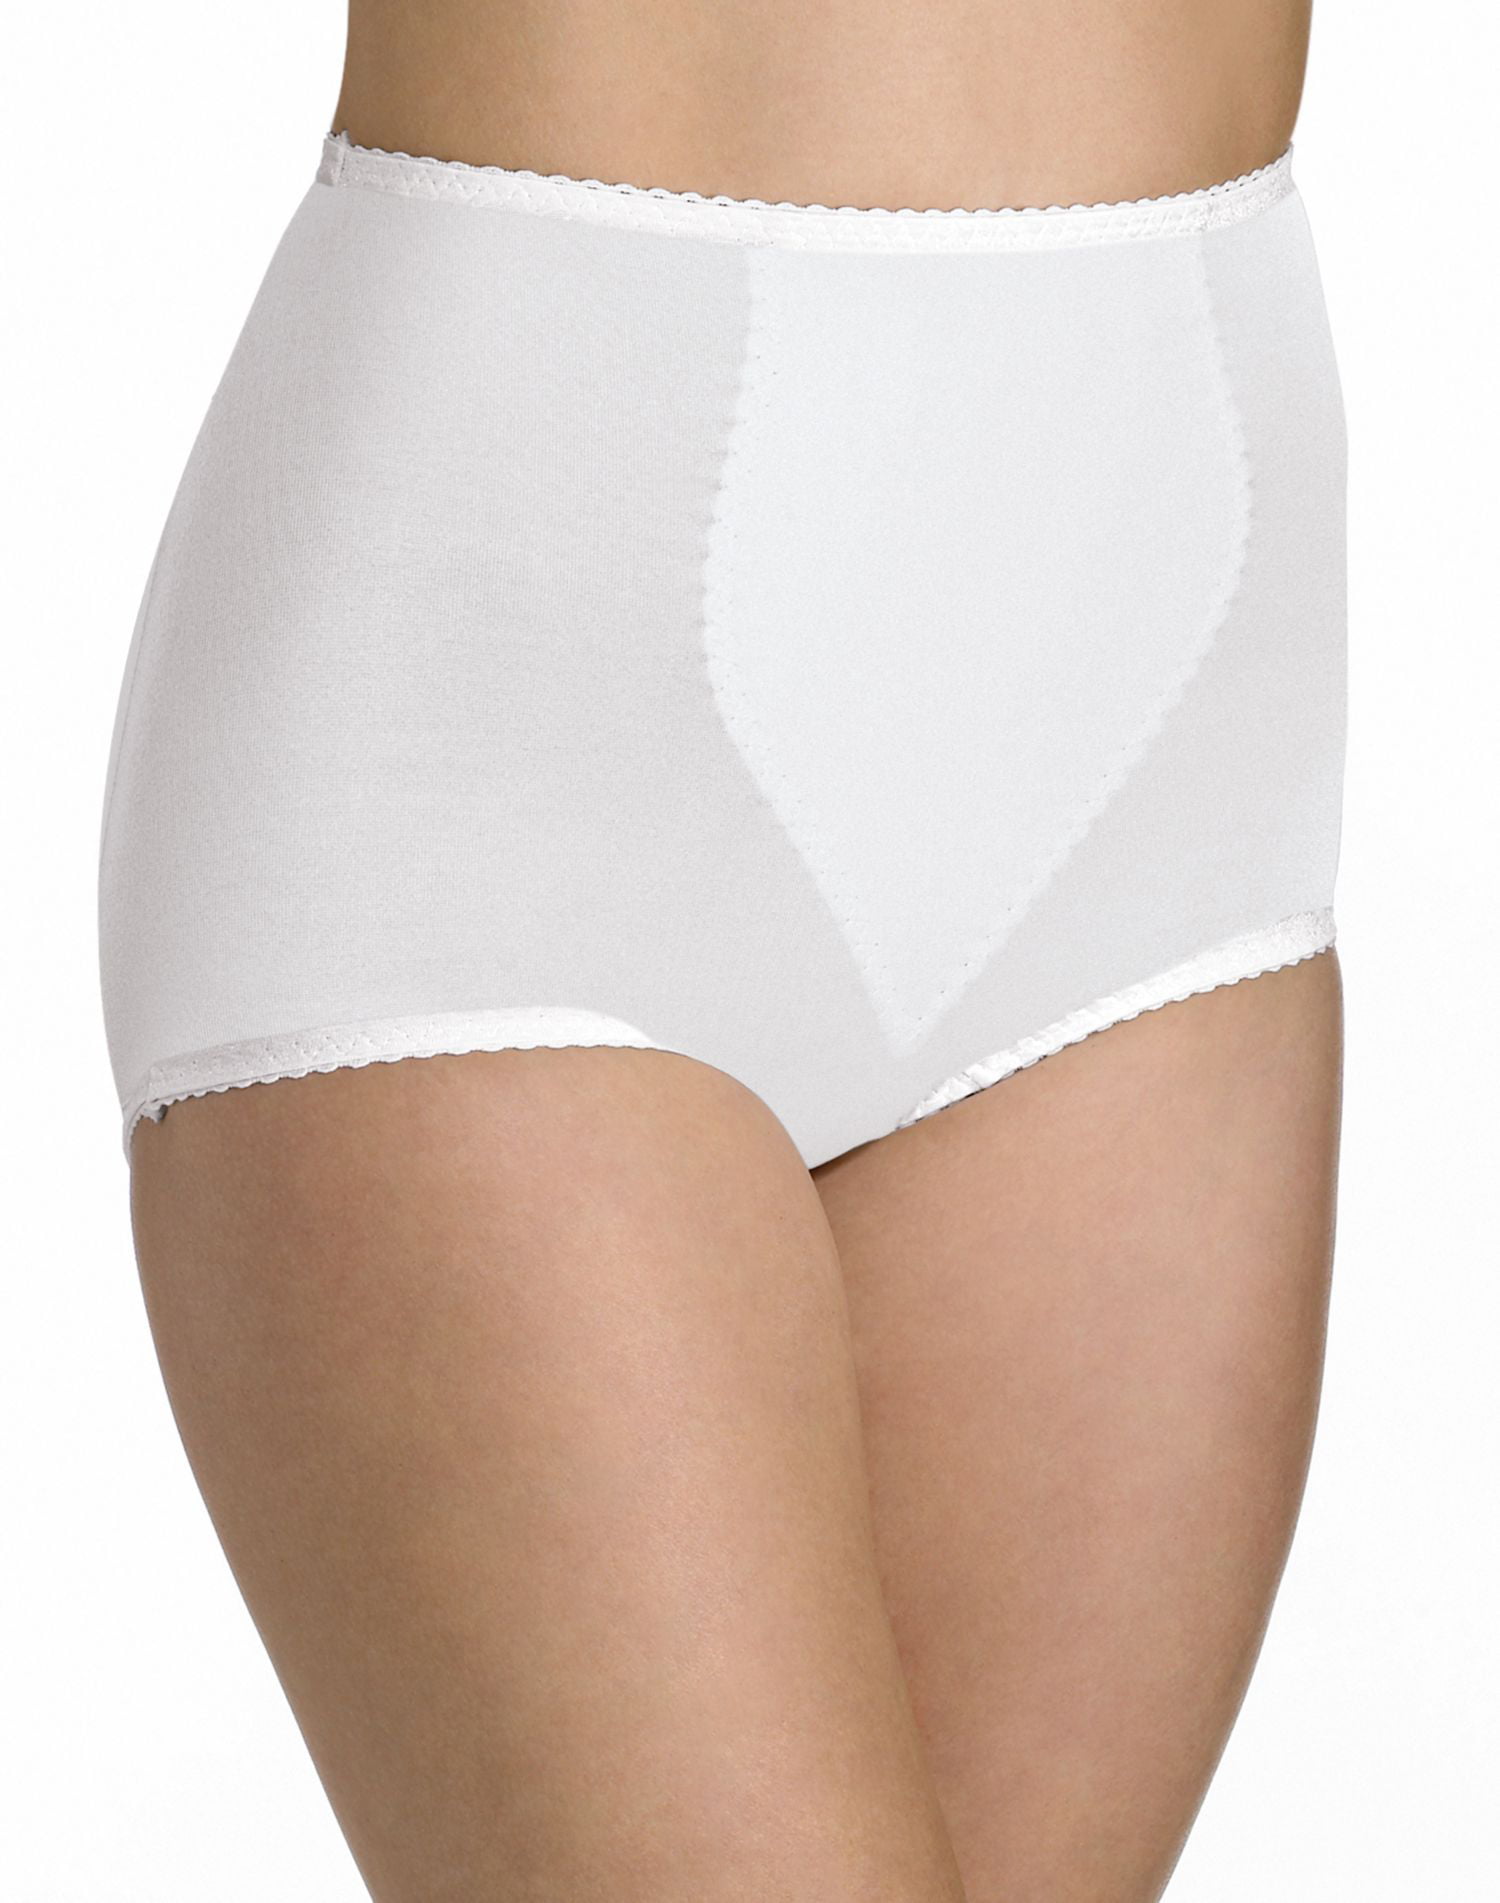 Bali Women's Smoothers Shapewear Cotton Brief with Light Control Pack of 2 